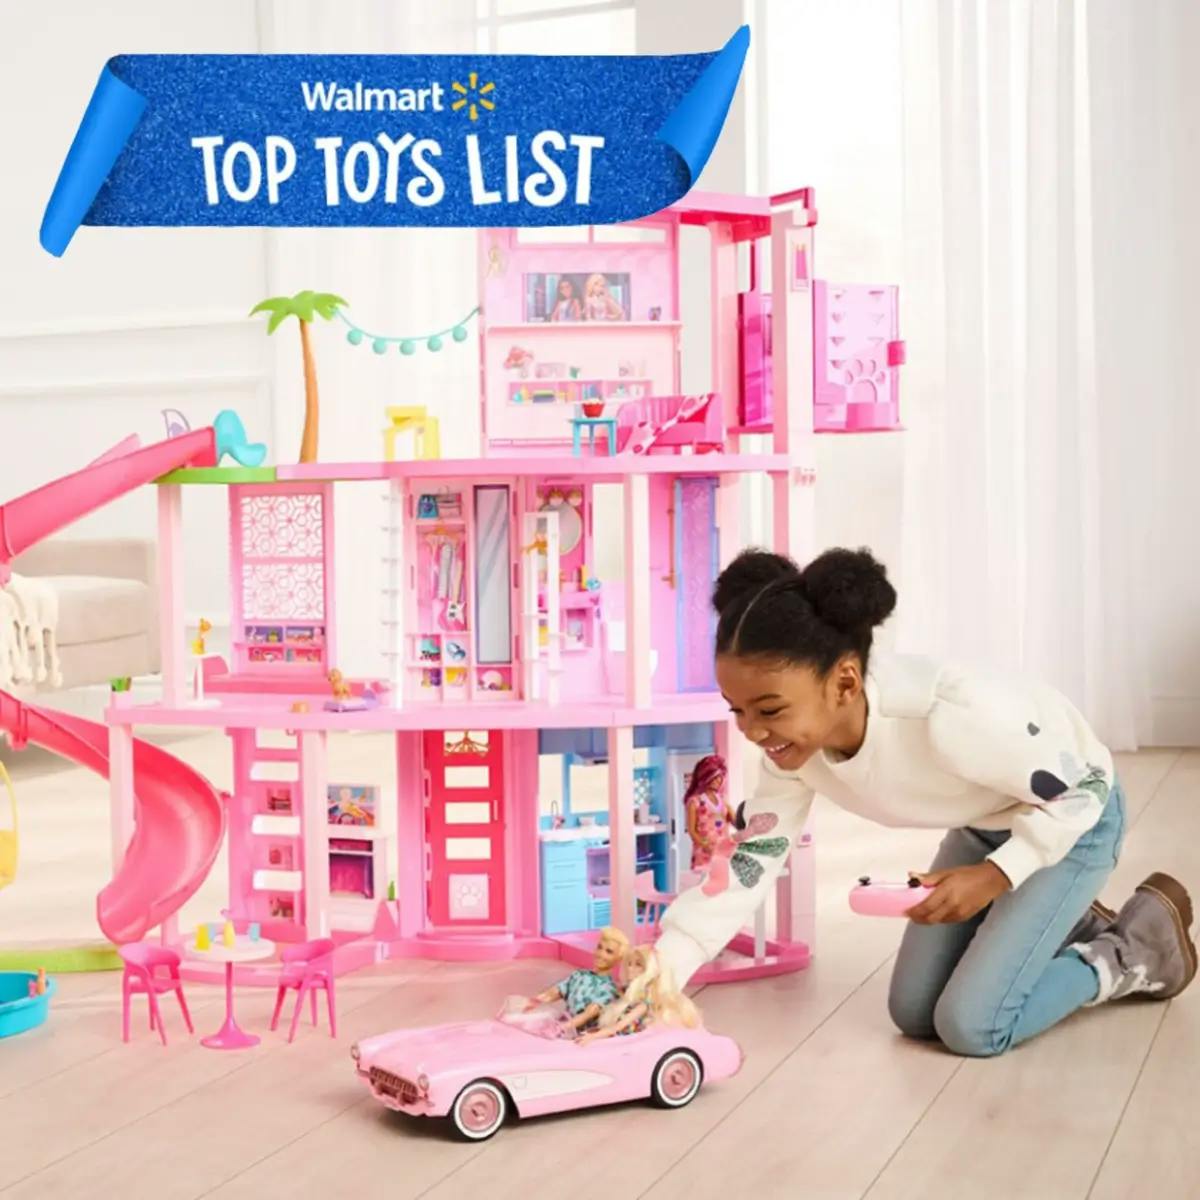 Child playing with Barbie Dreamhouse and Barbie Corvette, on the cover of the 20223 Walmart Top Toy Guide.